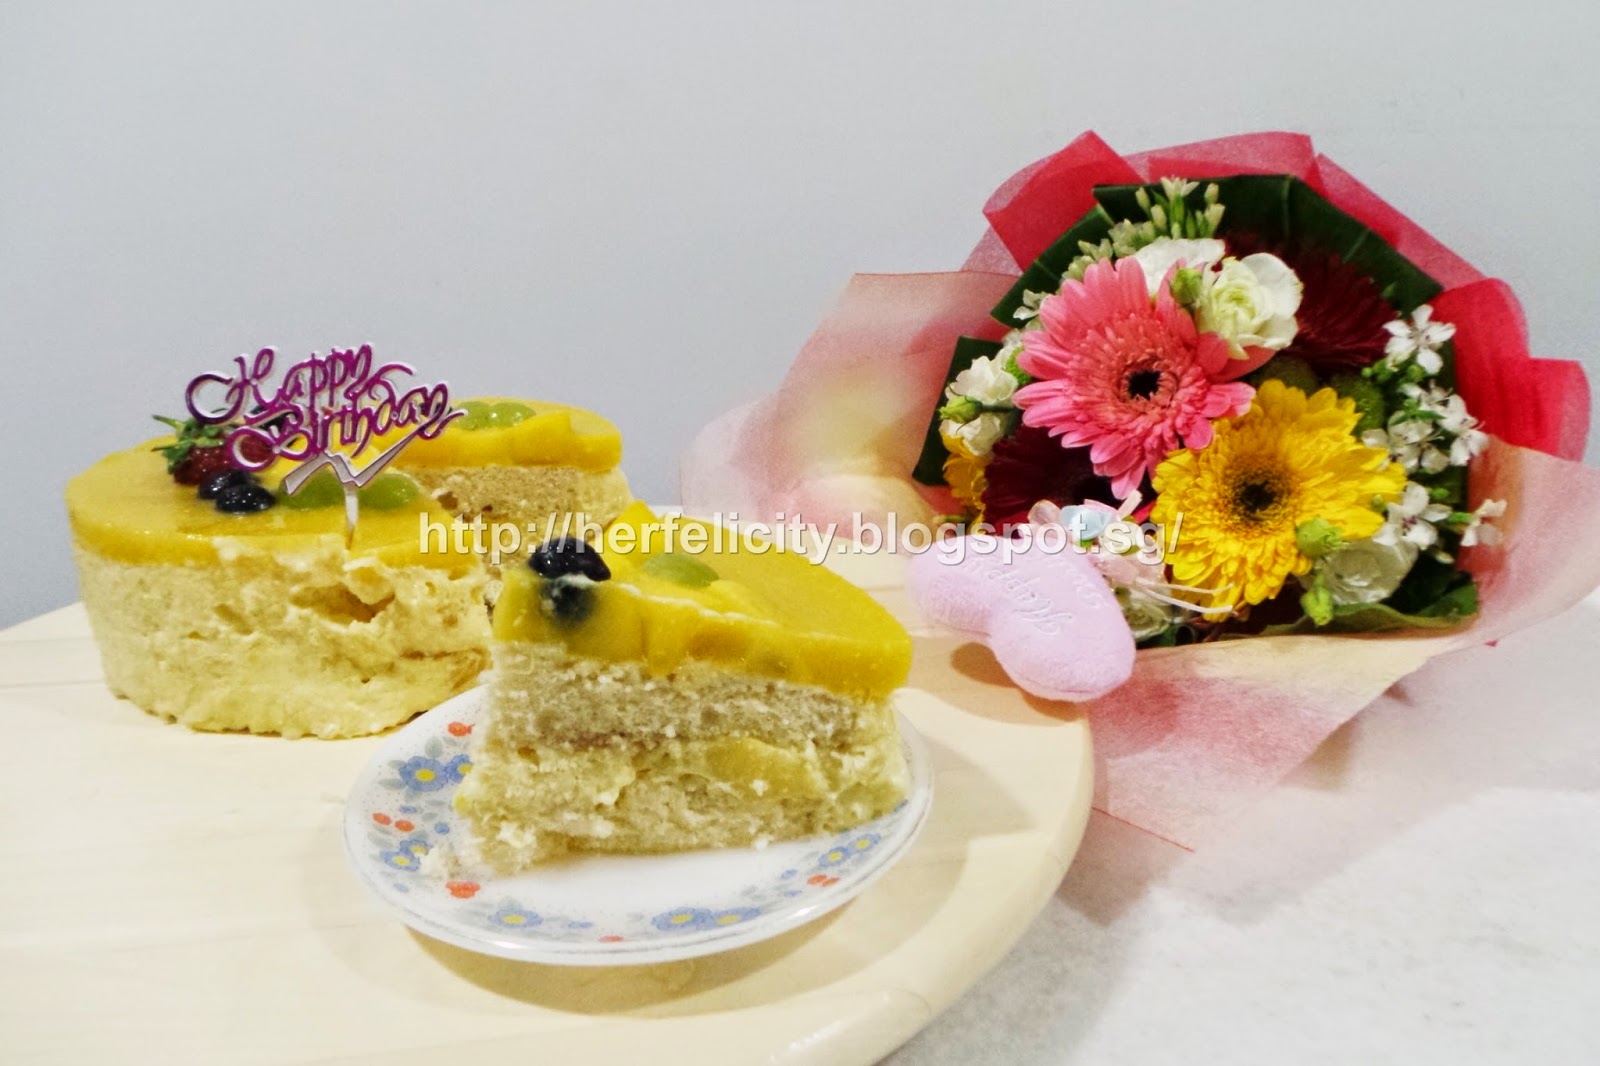 Lirong A Singapore Food And Lifestyle Blog Recipe Mango Moussecake,Boneless Ribs In Oven 350